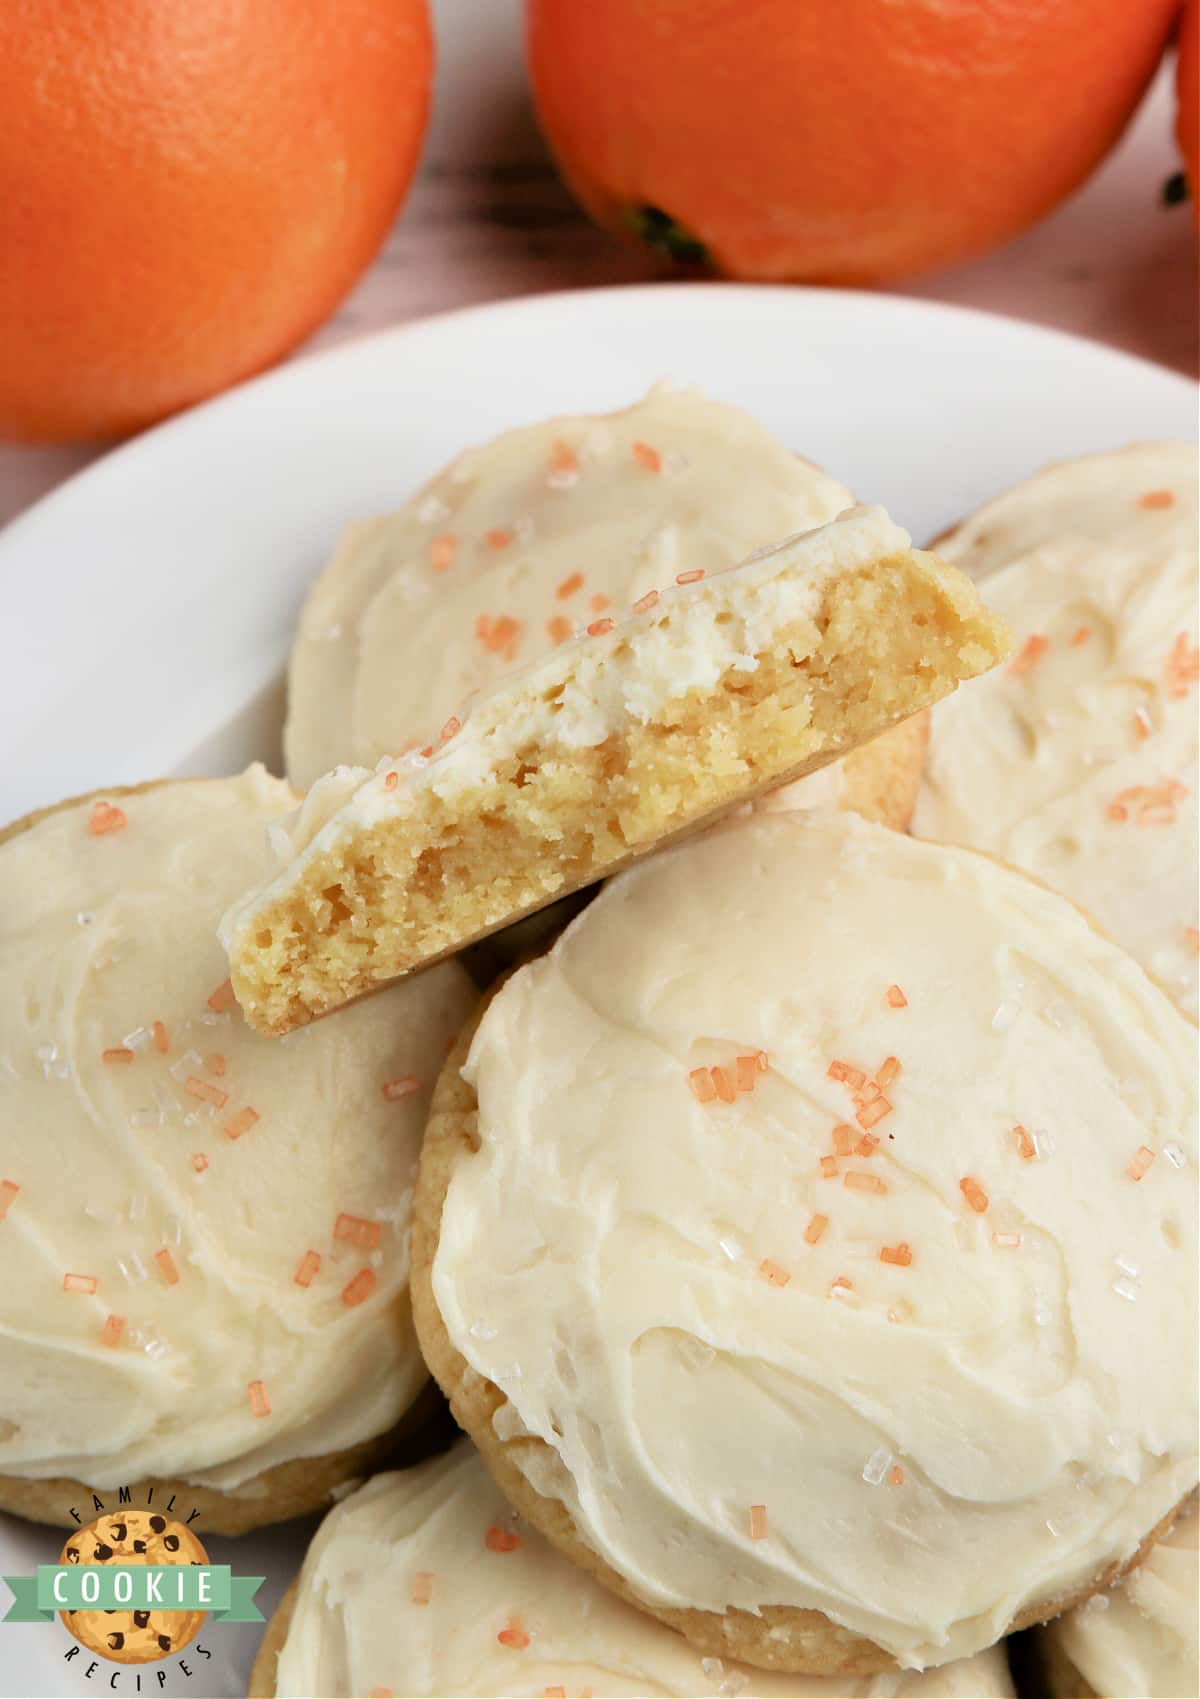 Frosted Orange Juice Cookies made with orange juice concentrate in both the cookies and the frosting! Simple orange cookie recipe packed with orange flavor!